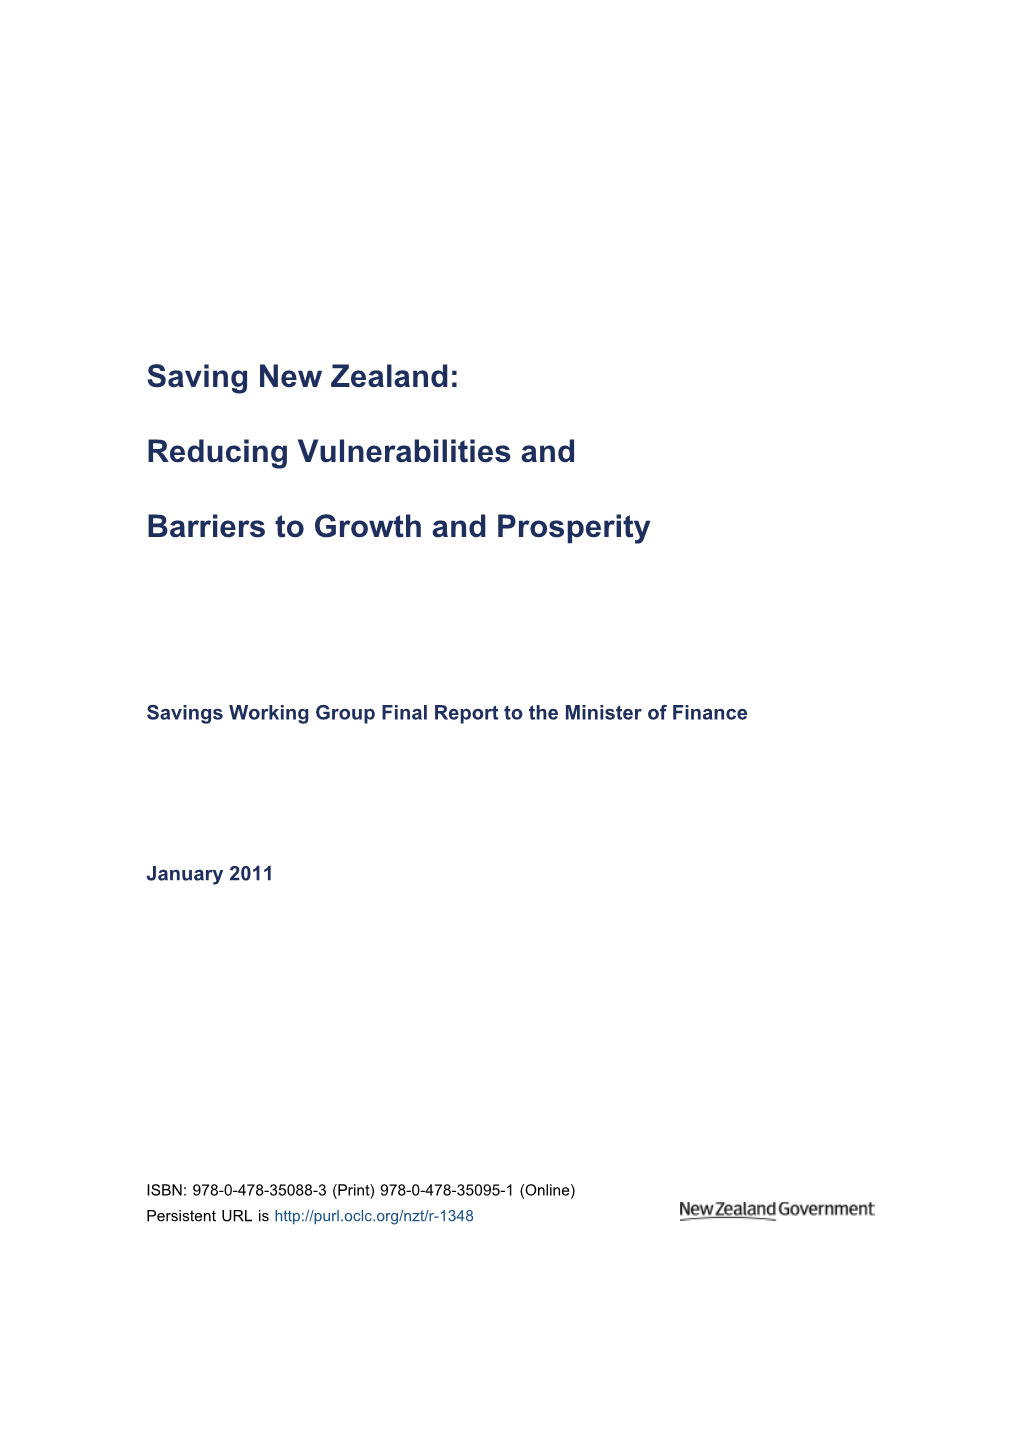 Saving New Zealand: Reducing Vulnerabilities and Barriers to Growth and Prosperity